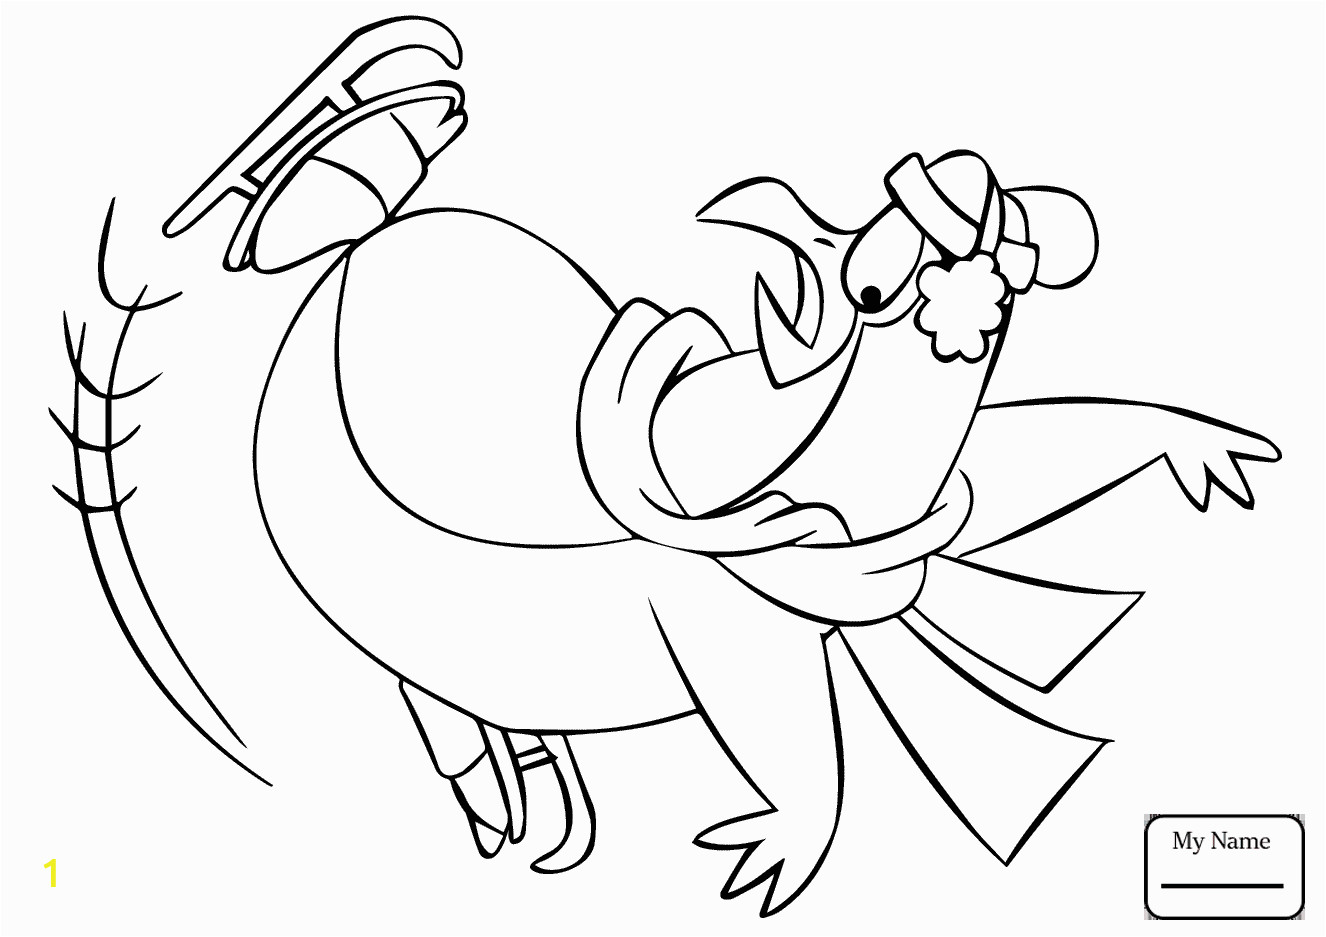 figure skating coloring pages